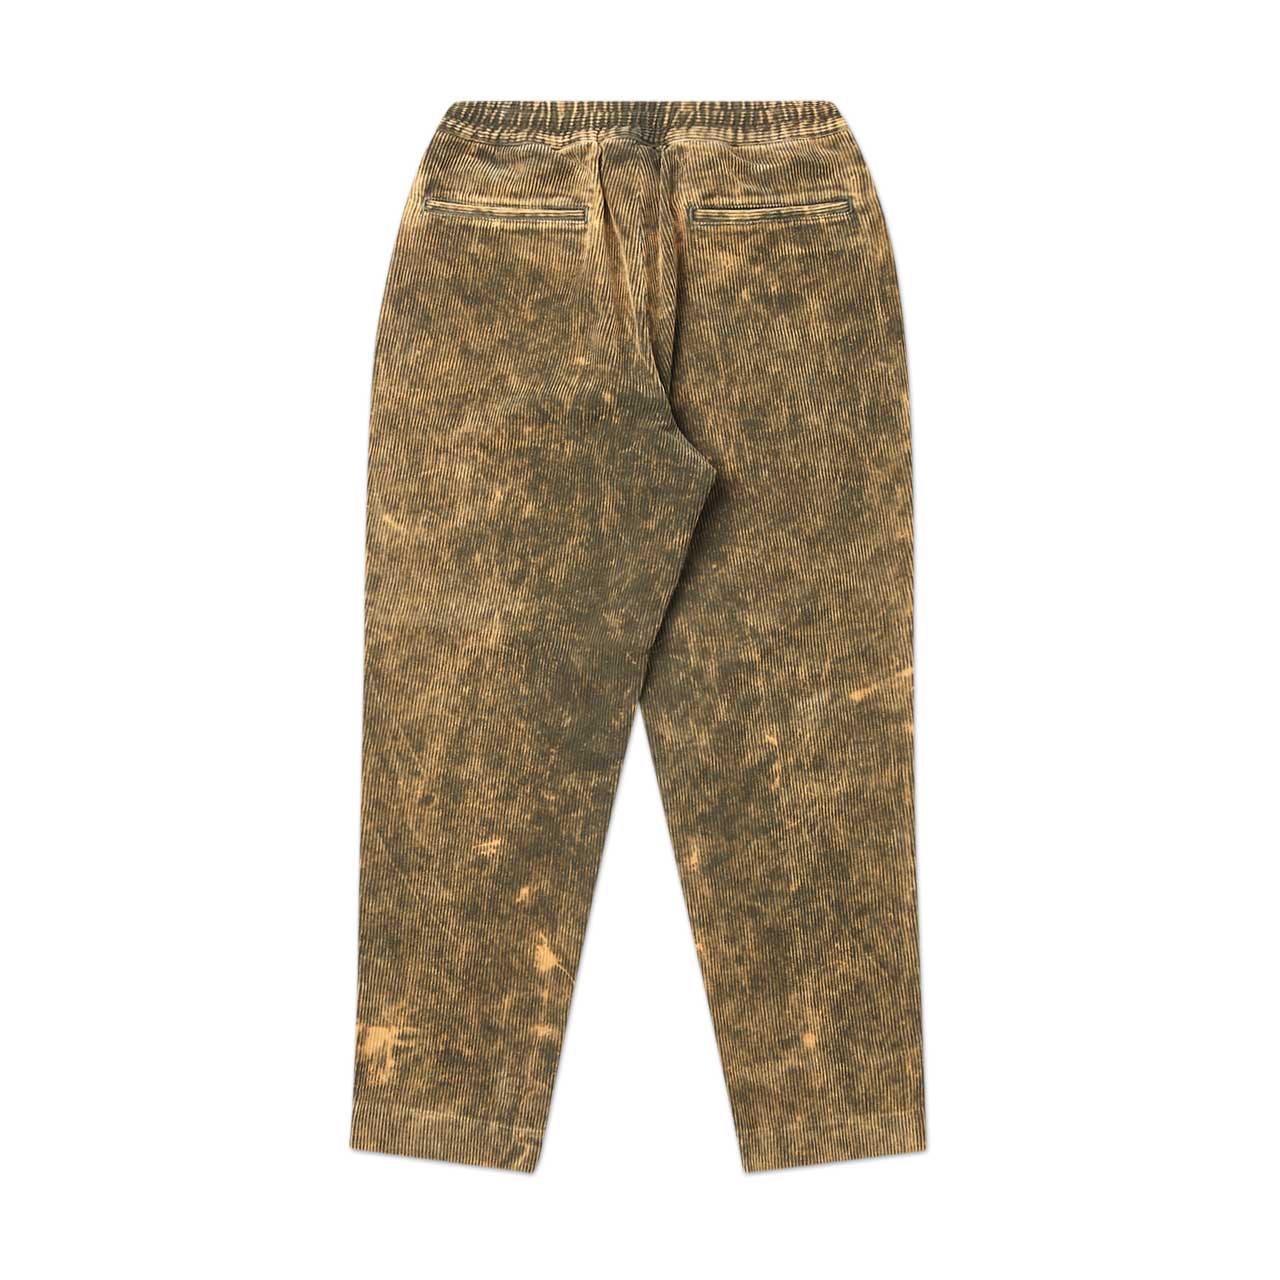 flagstuff bleach loose easy pants 2 (olive) - 20aw-fs-22 - a.plus - Image - 2